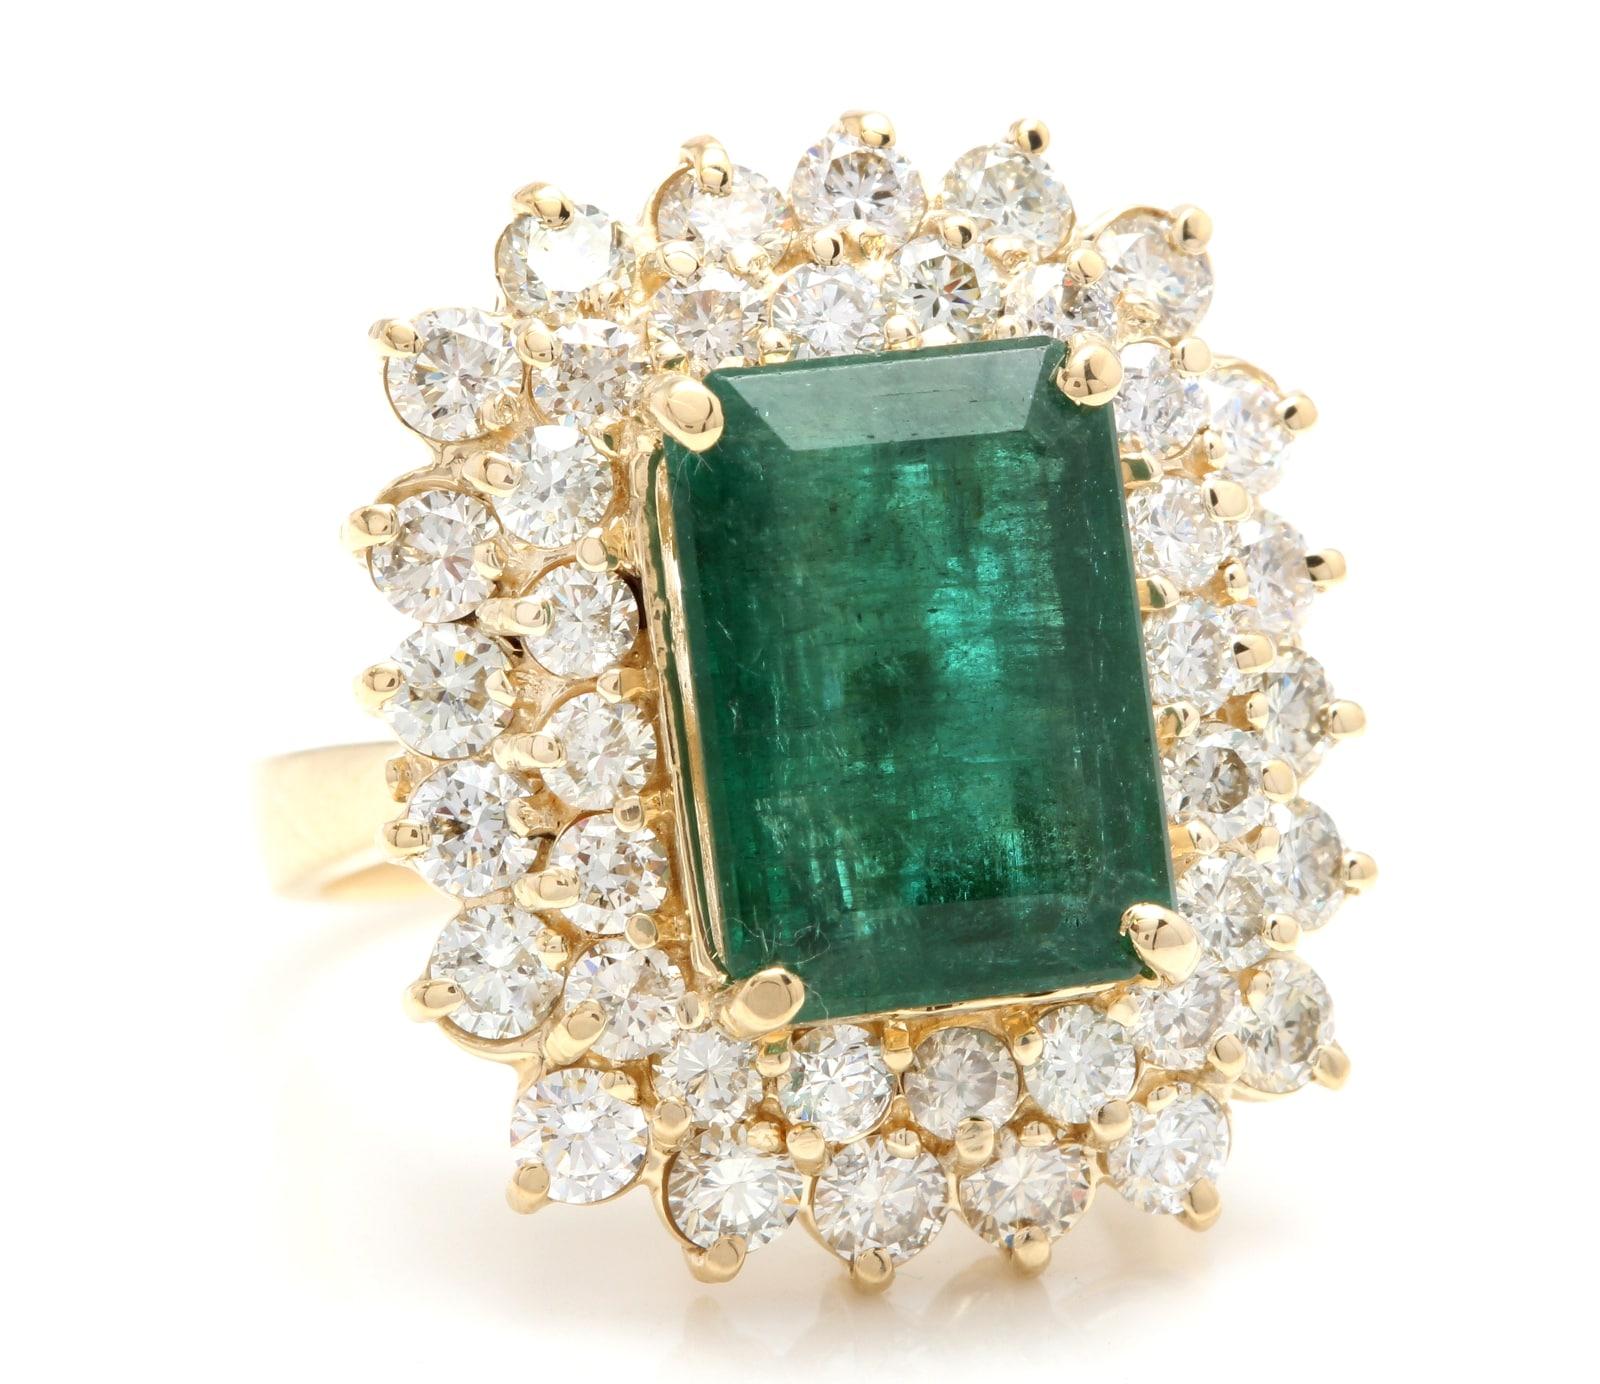 9.35 Carats Natural Emerald and Diamond 14K Solid Yellow Gold Ring

Total Natural Green Emerald Weight is: Approx. 7.00 Carats (transparent) (Oil Treated)

Emerald Measures: Approx. 12.00 x 9.50mm

Natural Round Diamonds Weight: Approx. 2.35 Carats